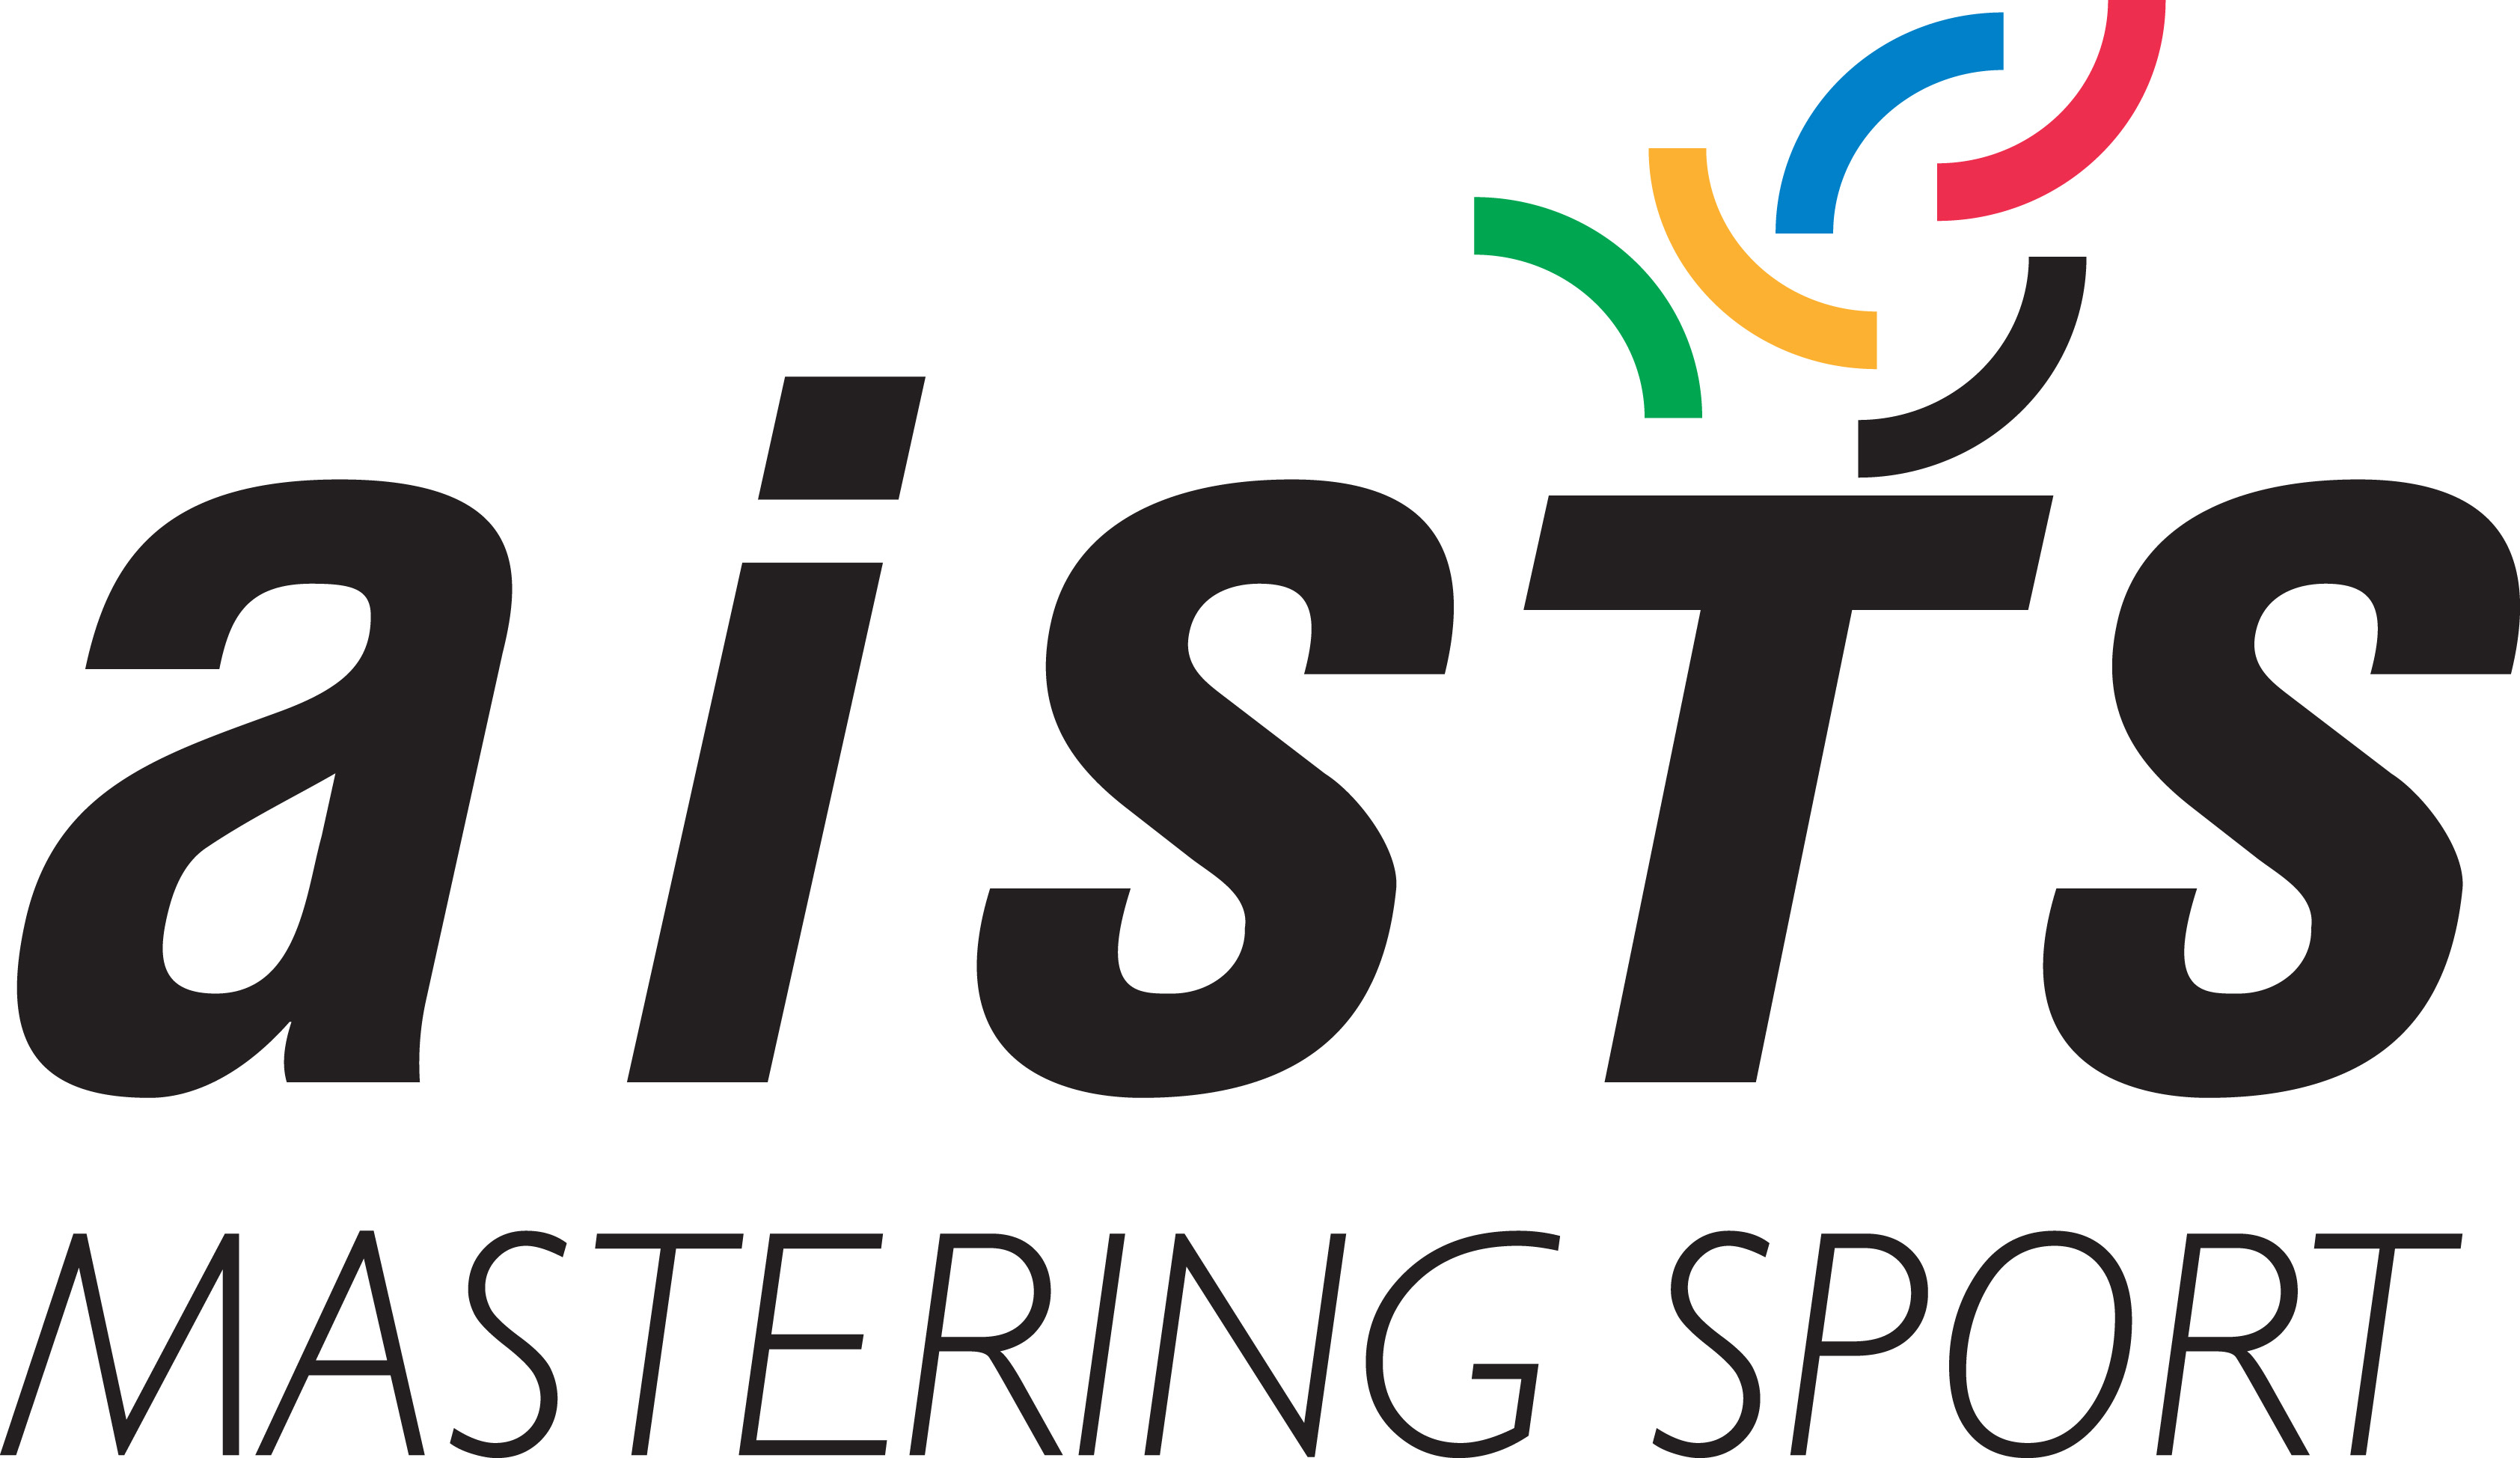 The AISTS survey has raised some important issues regarding sustainability in sport ©AISTS